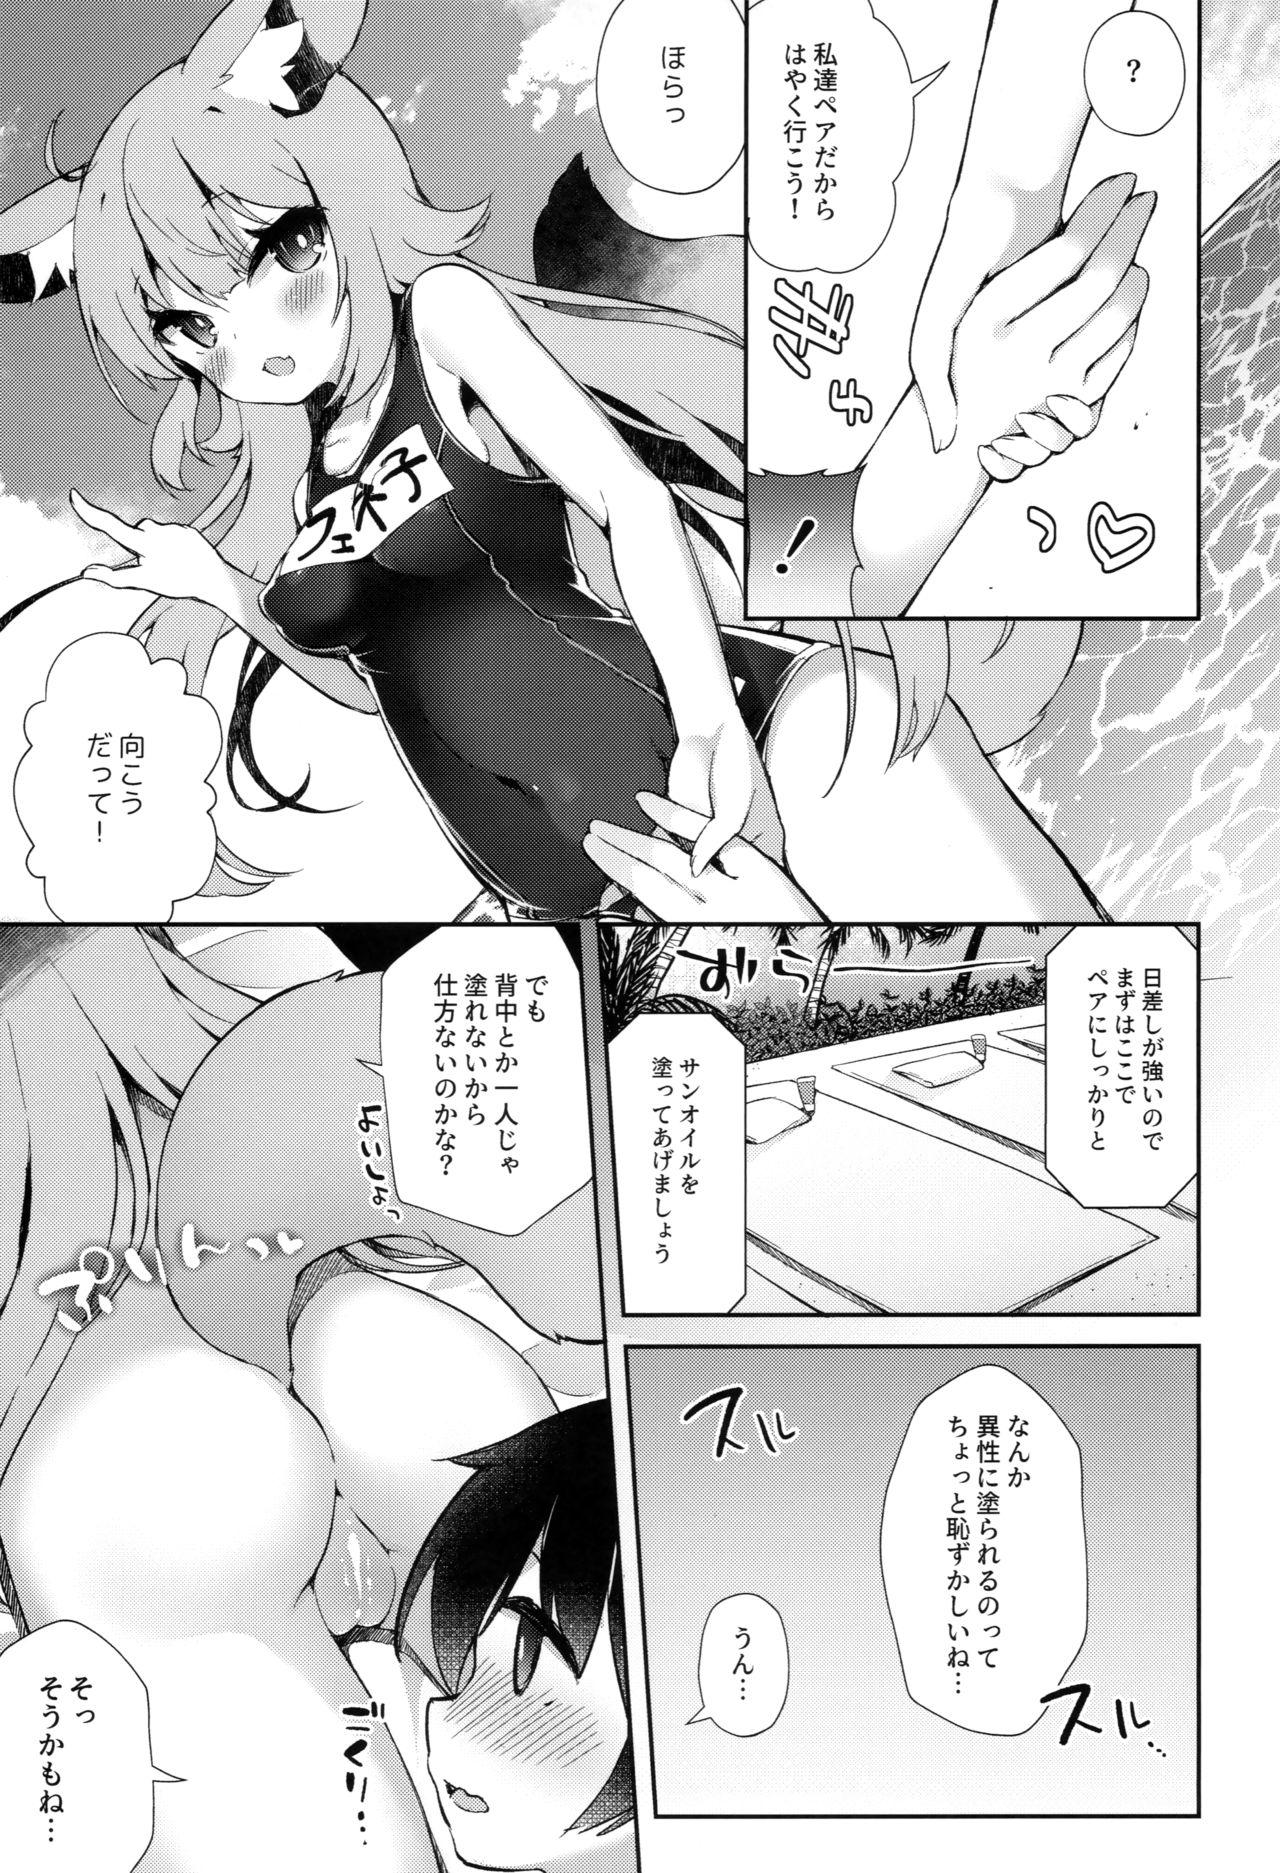 Grandmother Fennec Musume Summer! - Original Sexy Girl Sex - Page 6